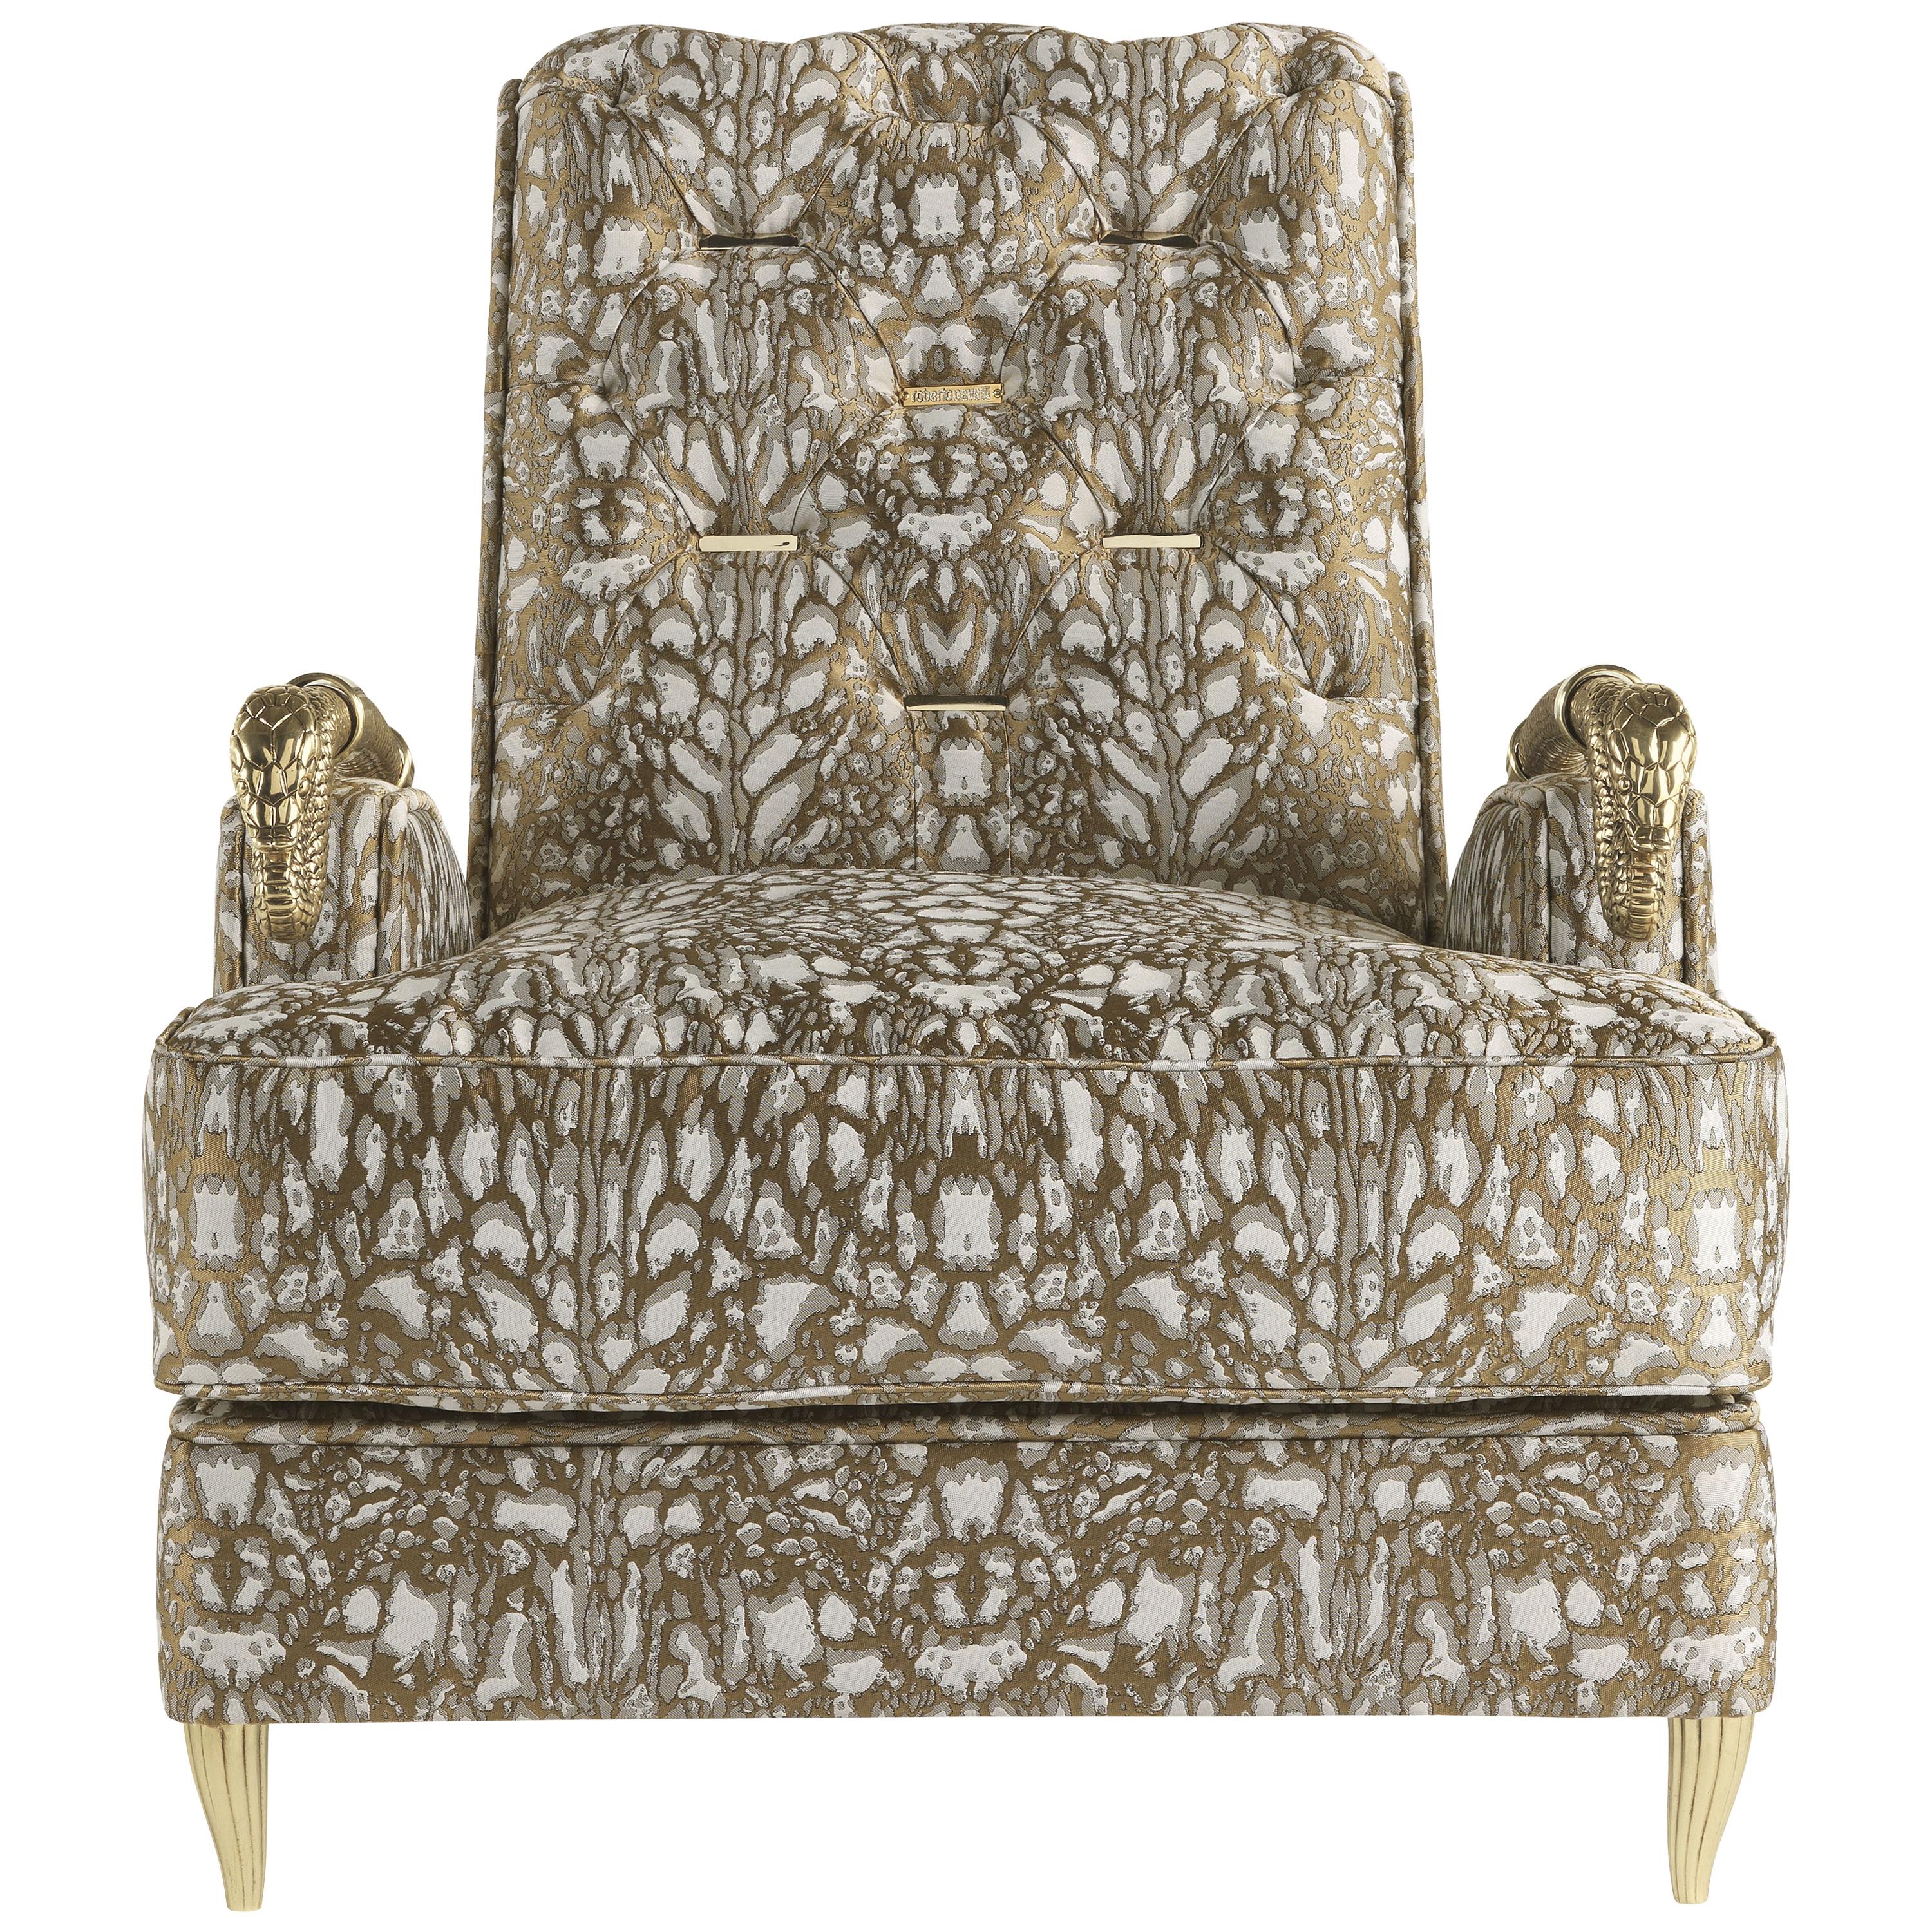 21st Century Snake Armchair in Fabric by Roberto Cavalli Home Interiors